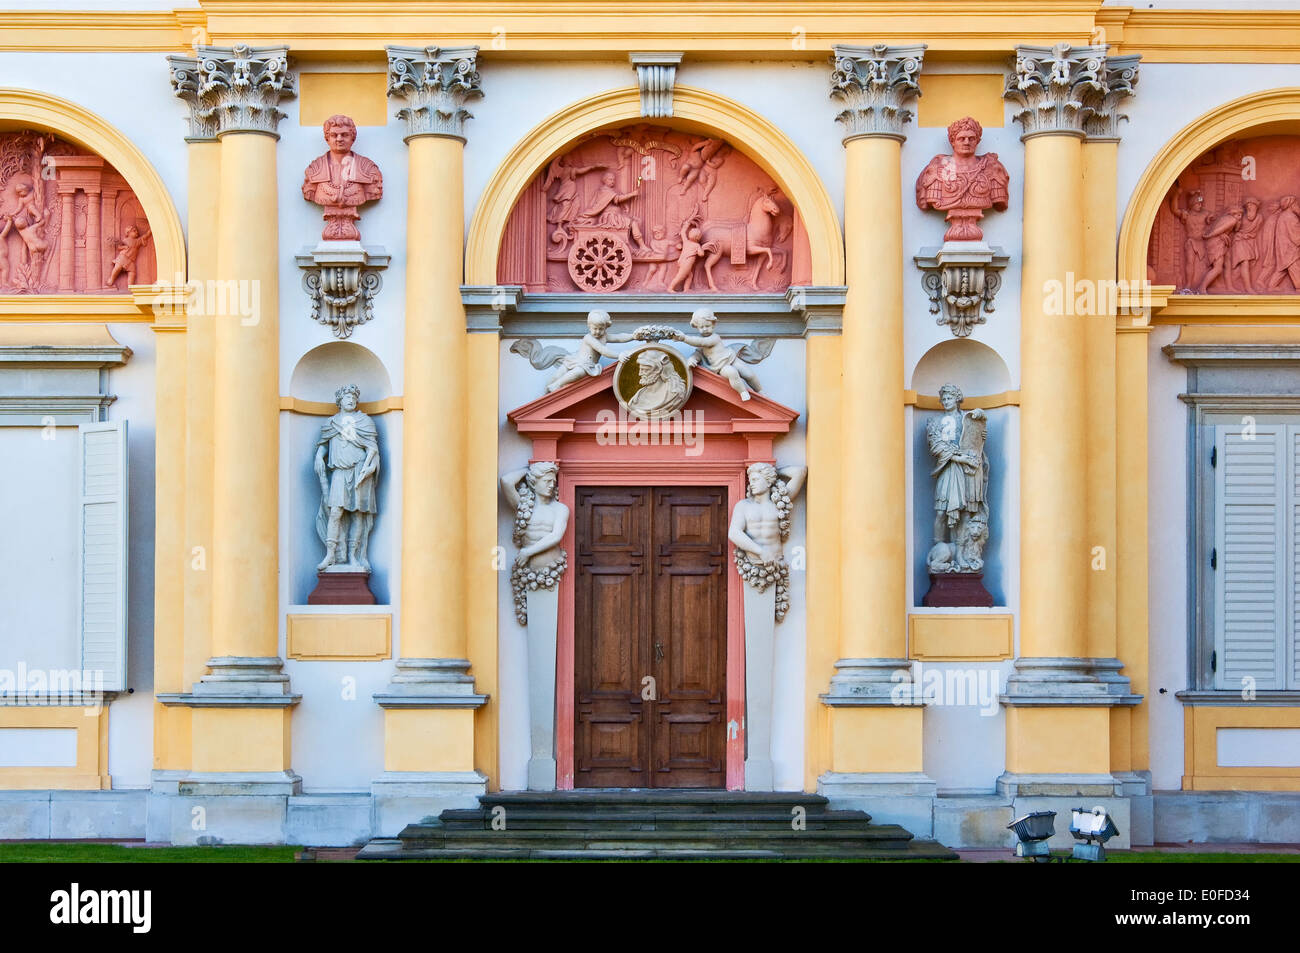 Bas reliefs, sculptures and pilasters at main building entrance at Wilanów  Palace in Warsaw, Poland Stock Photo - Alamy